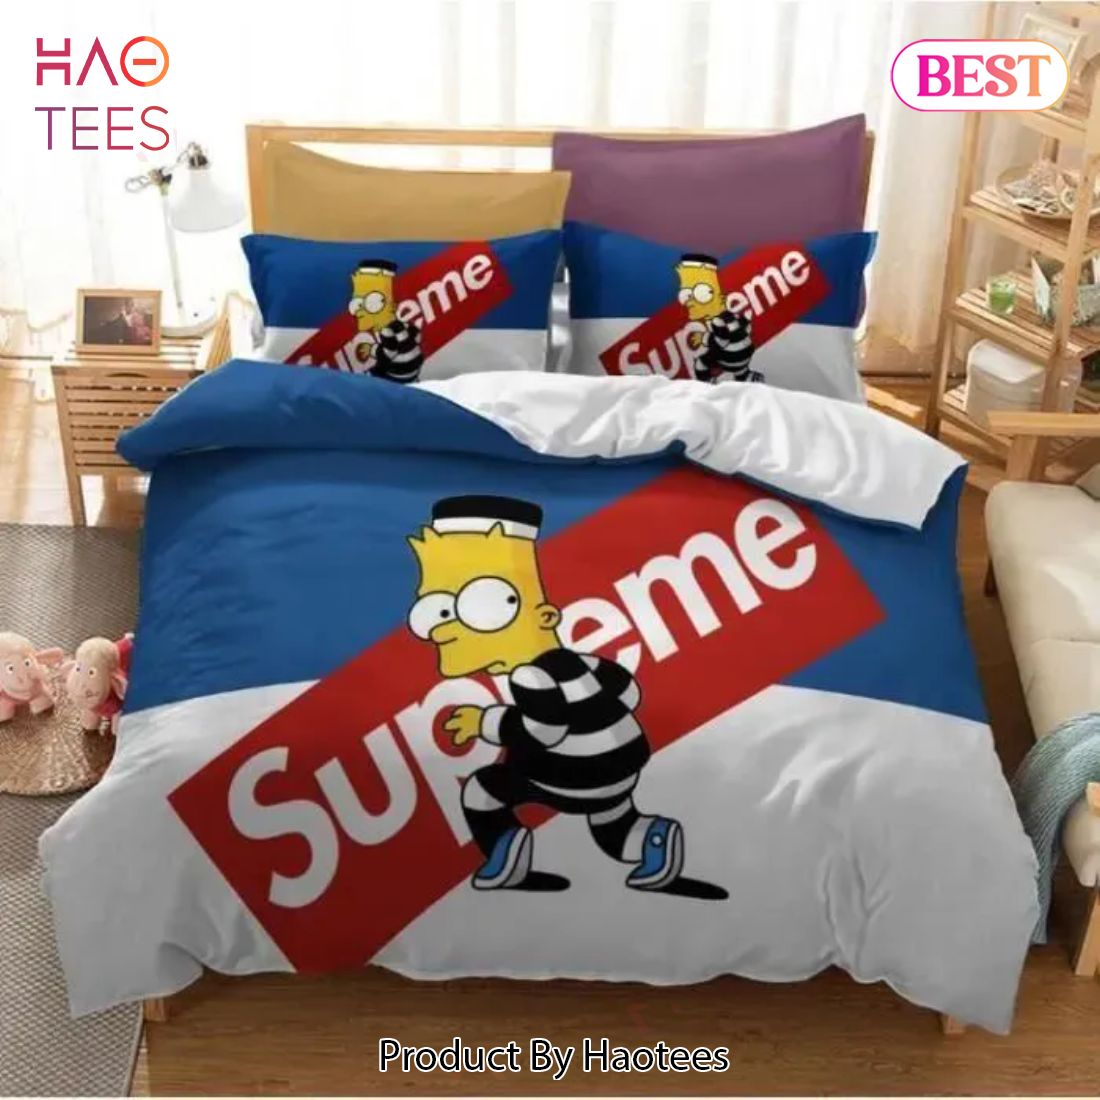 SALE] Supreme White Logo Red Luxury Brand Bedding Set Duvet Cover Home  Decor Special Gift in 2023